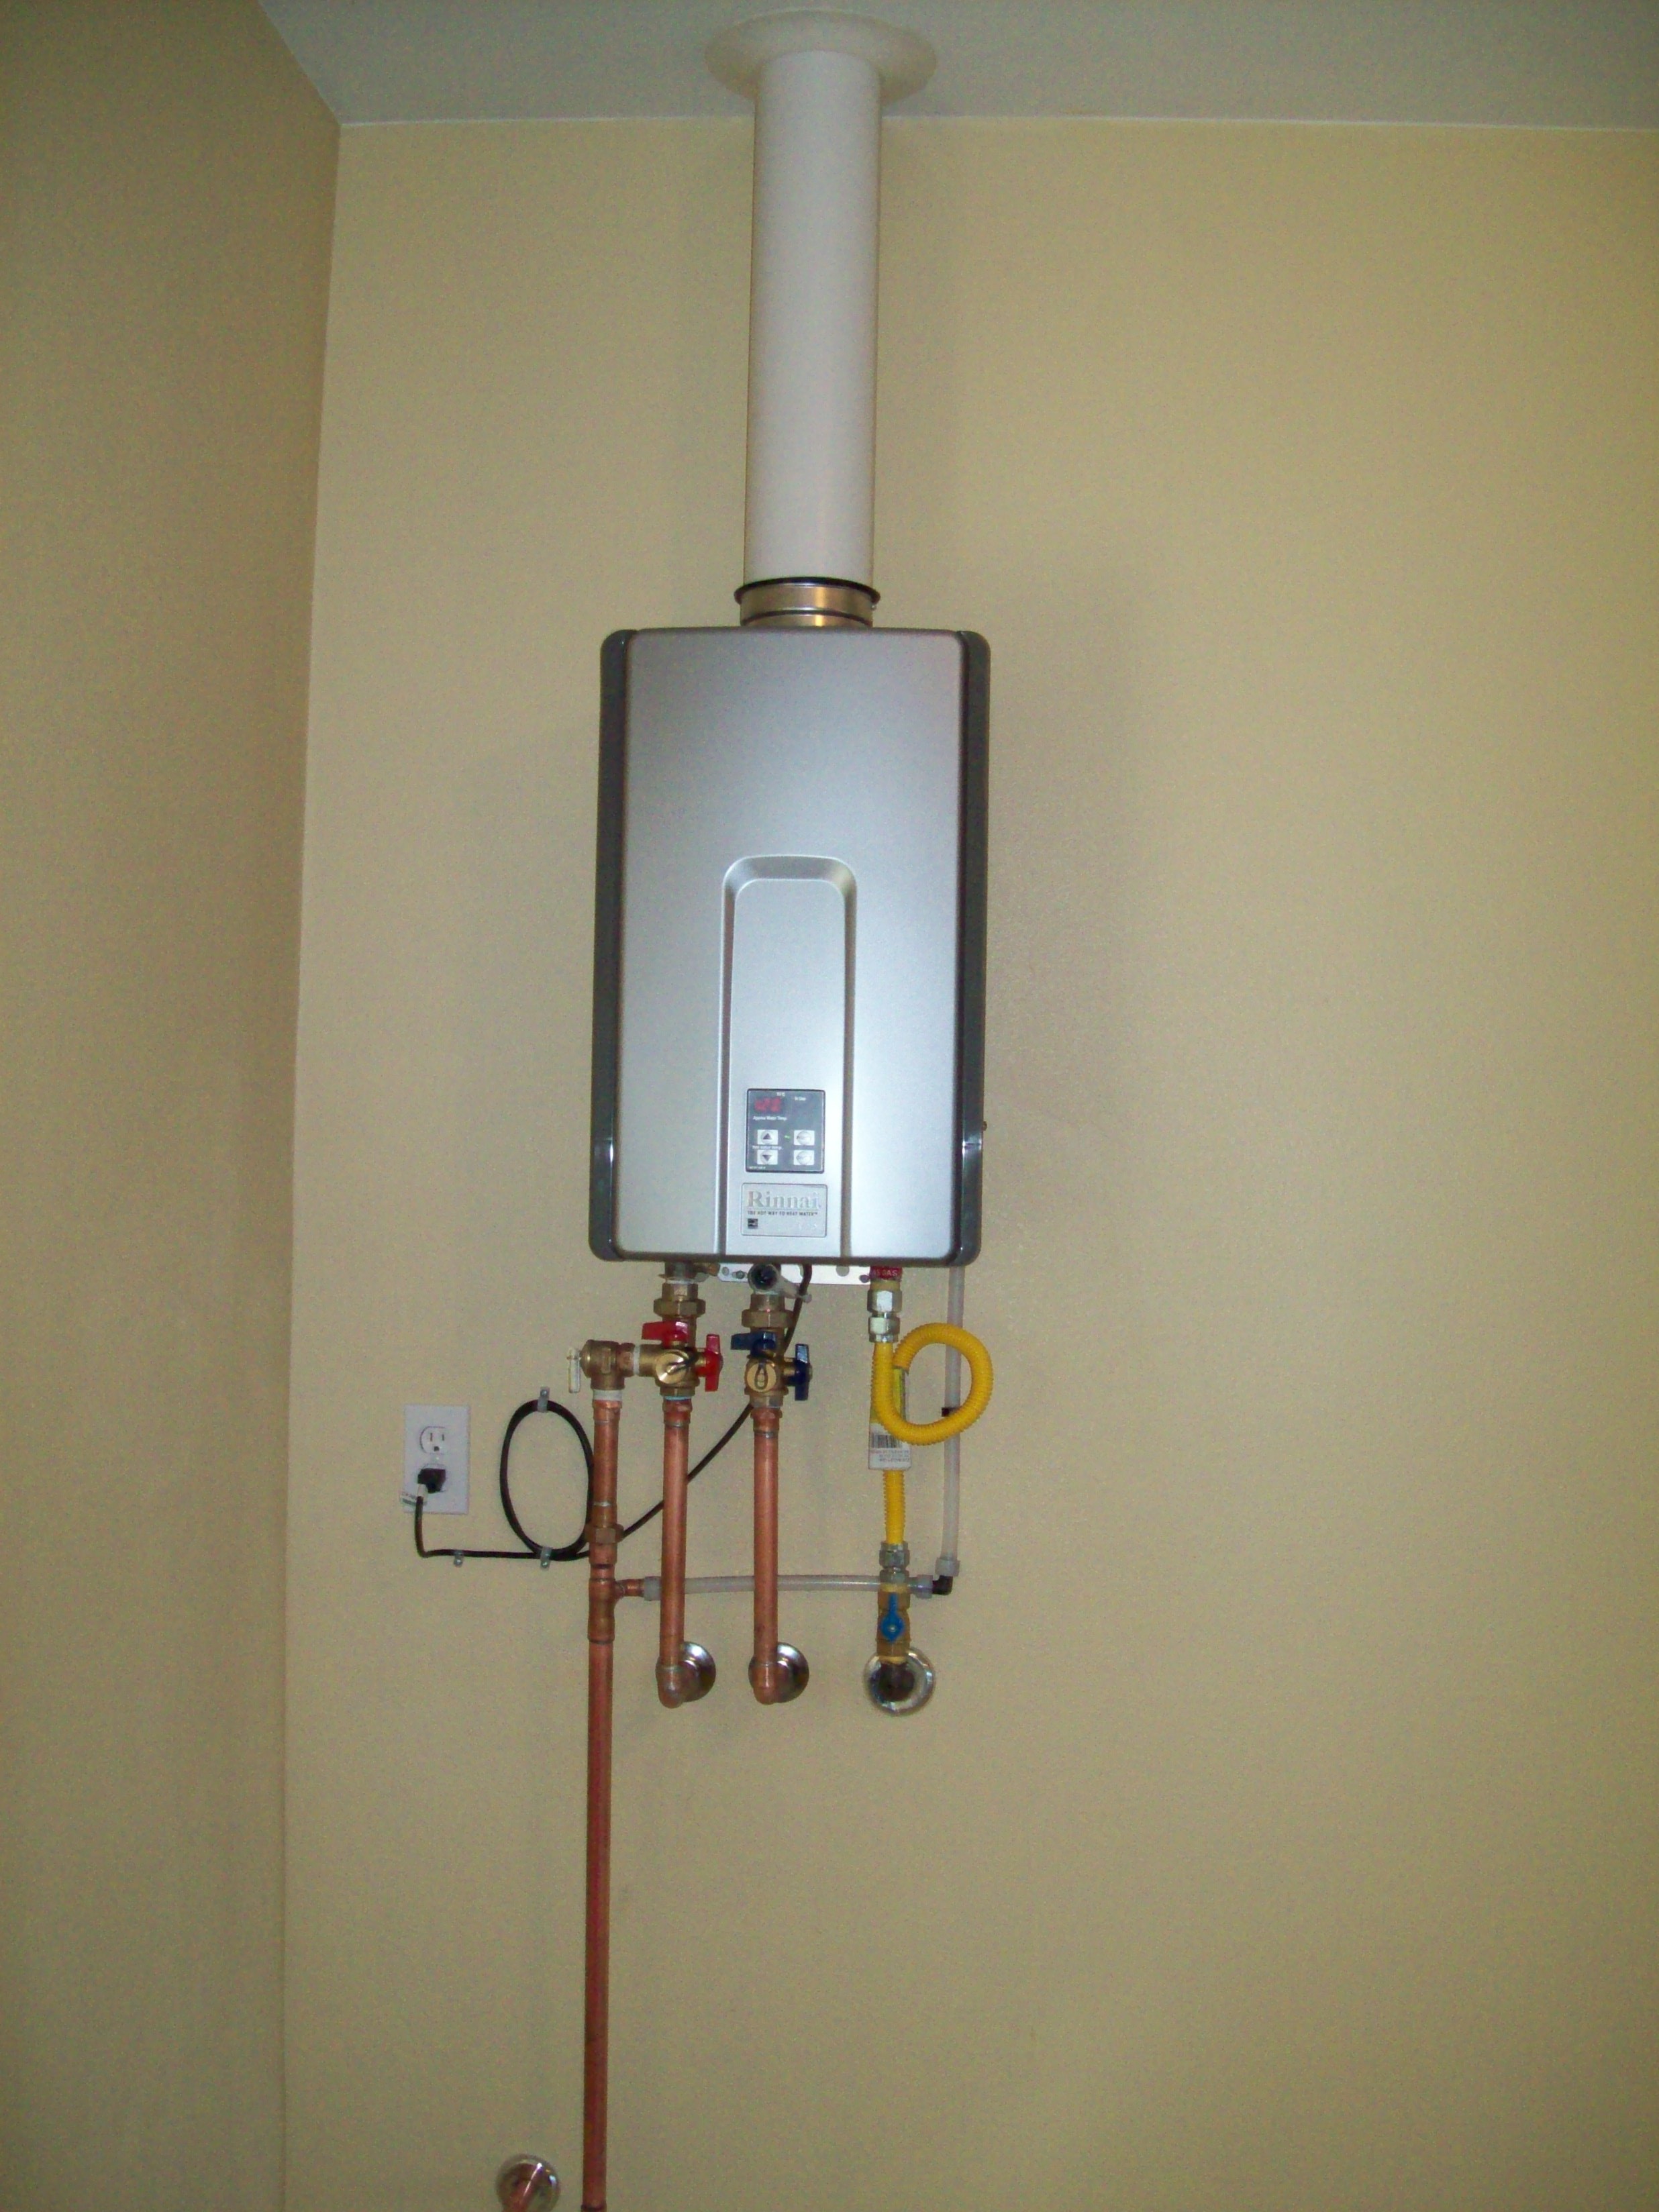 different-types-of-water-heaters-best-water-heater-and-water-filter